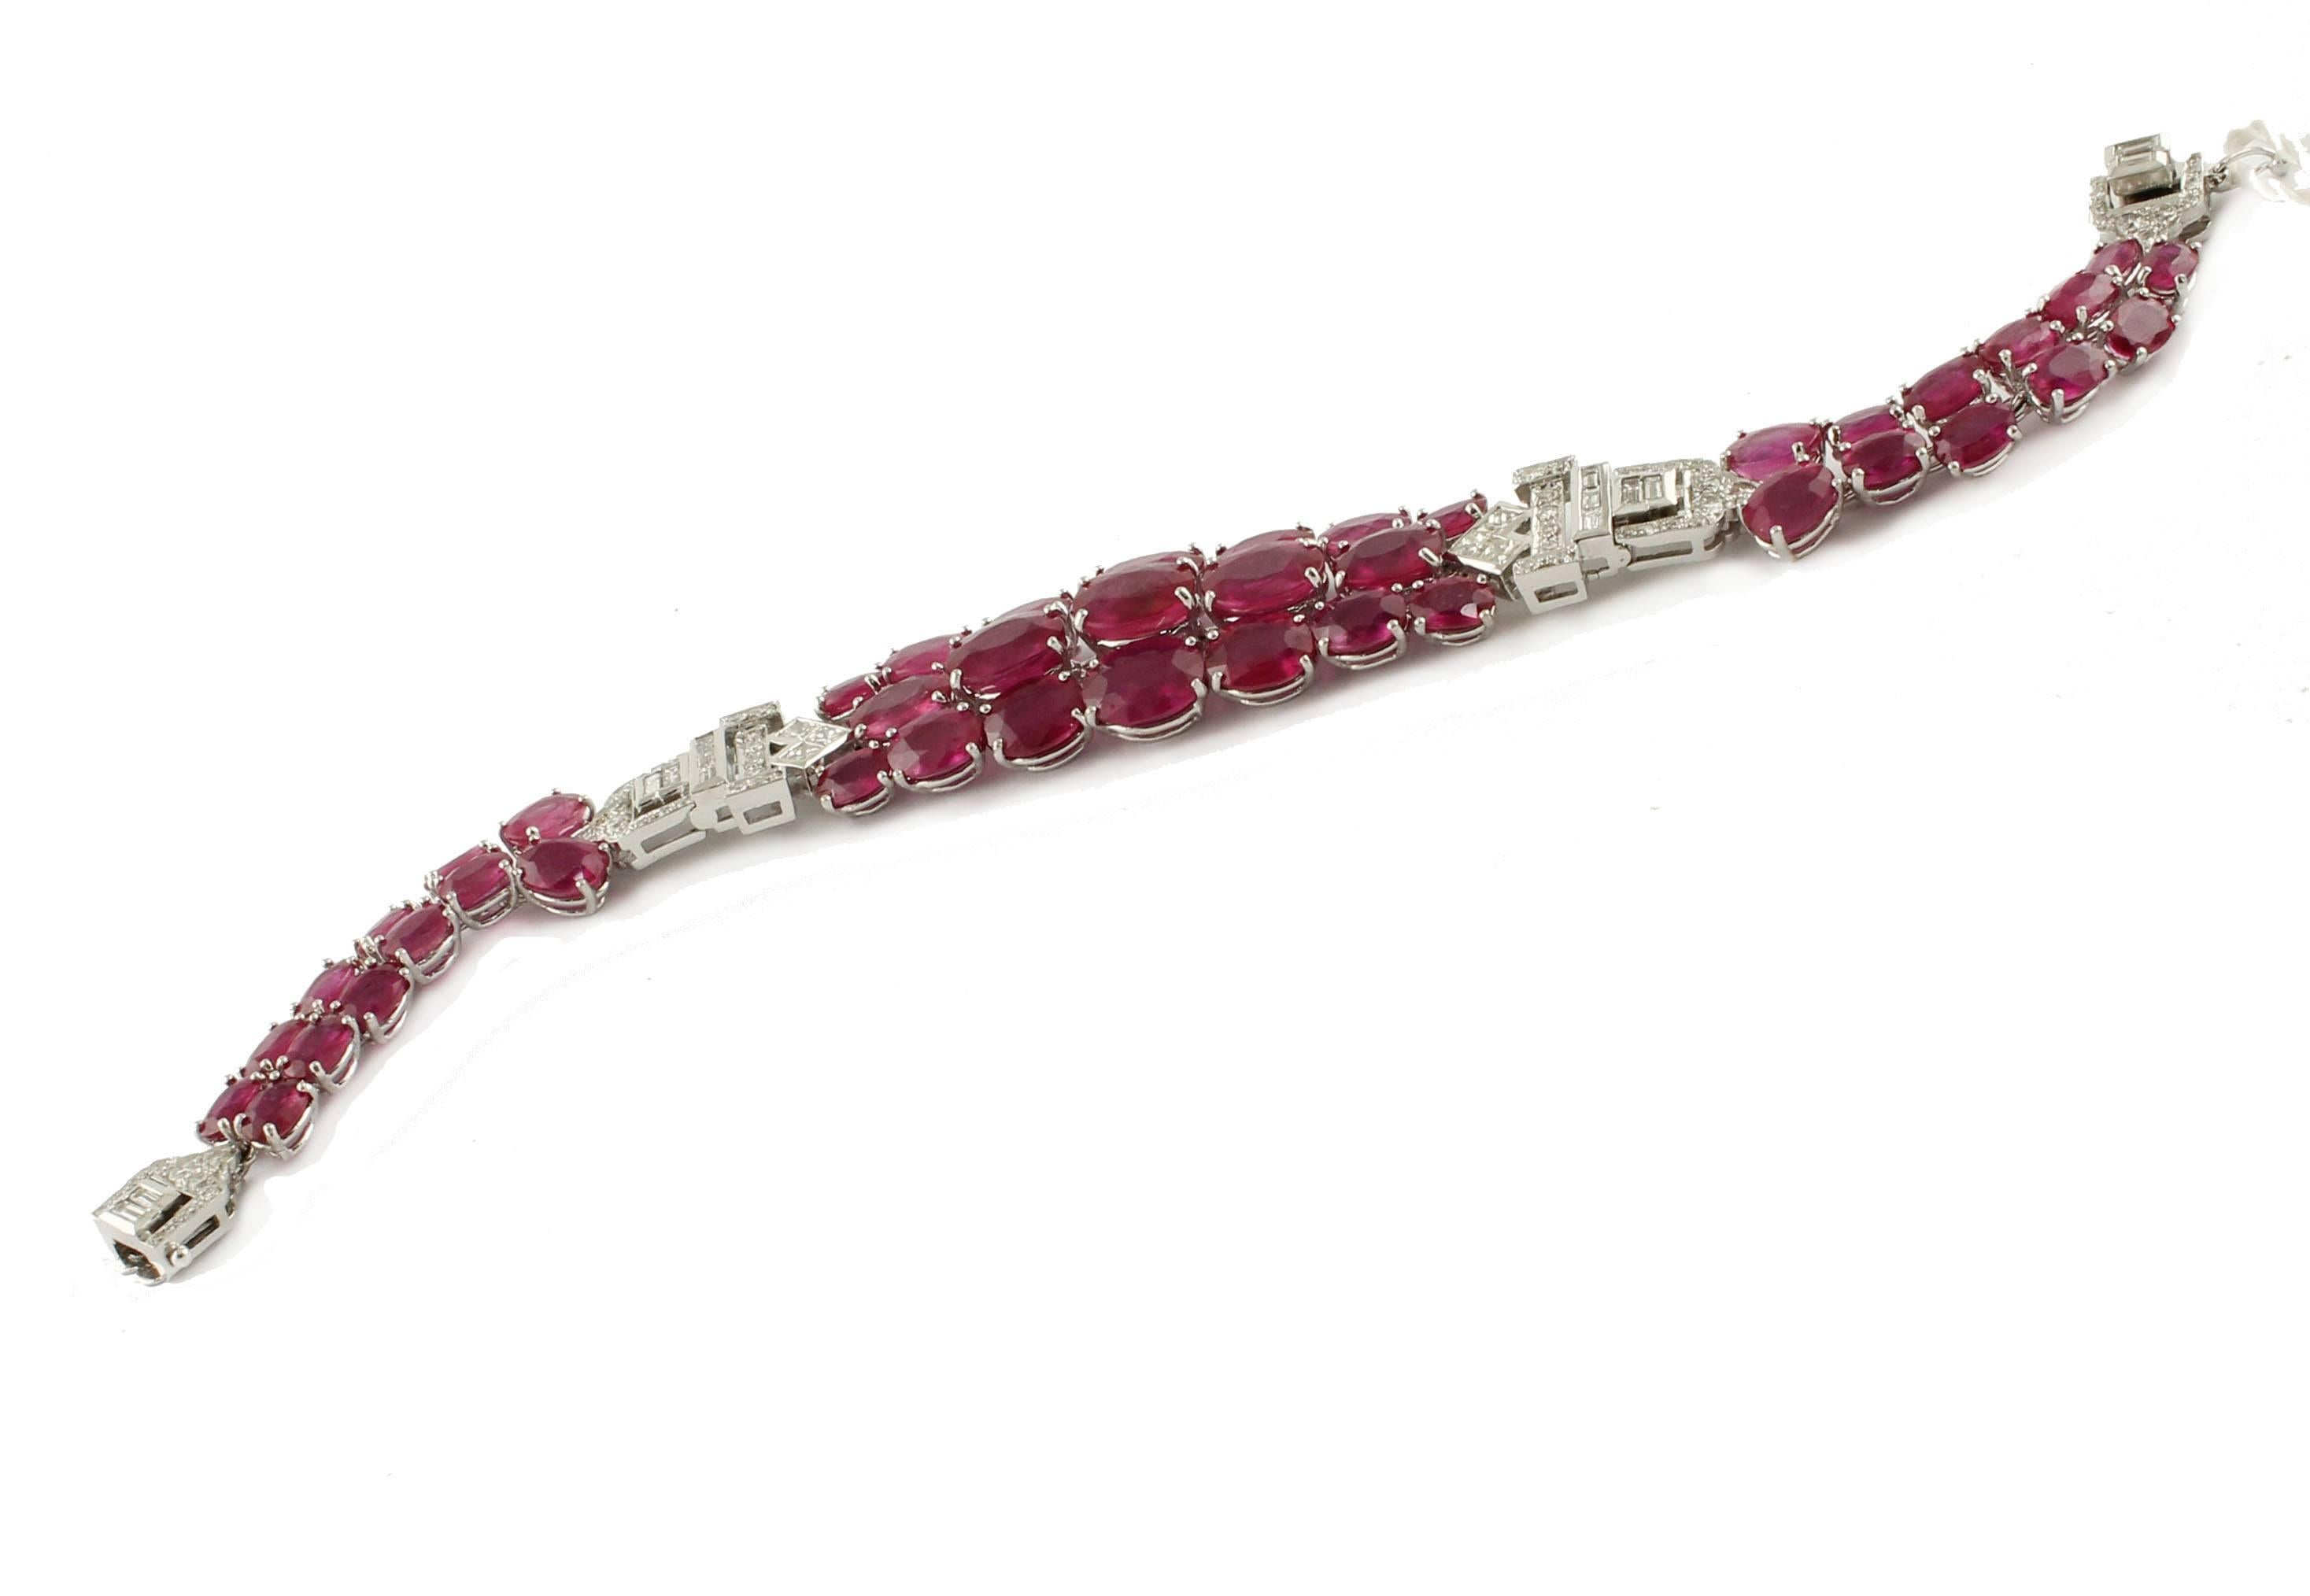 Charming bracelet in 14kt white gold, all studded with 55 ct rubies and 14 kt white gold details, with diamonds from ct 2.83. Total weight g 31.10.

Diamonds ct 2.83
Rubini ct 55.85
Total weight 31.10
R.F + gffaa